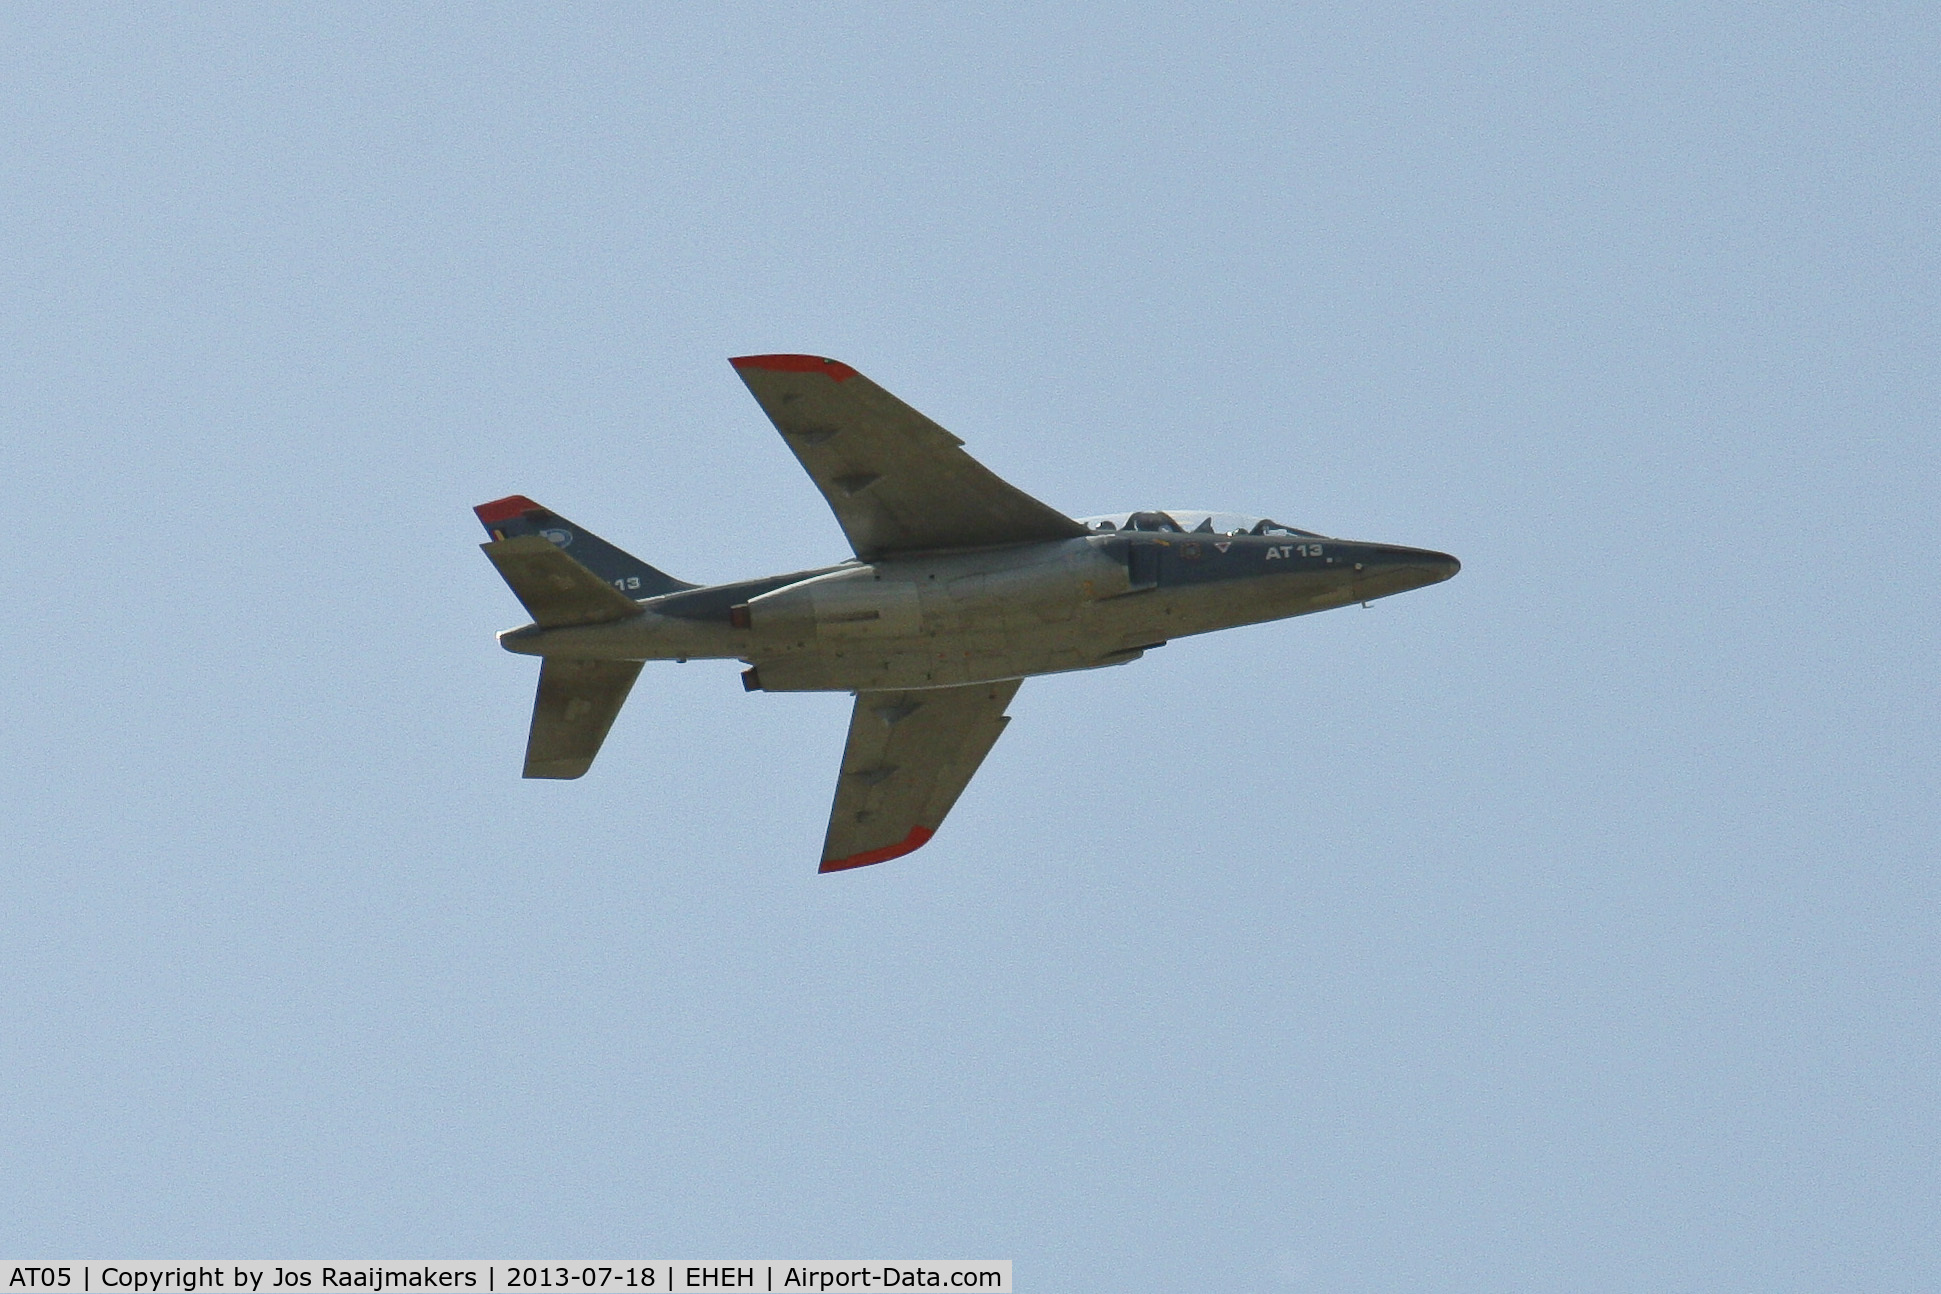 AT05, Dassault-Dornier Alpha Jet 1B C/N B05/1018, Several times this Alpha Jet passed by followed by the AT13.